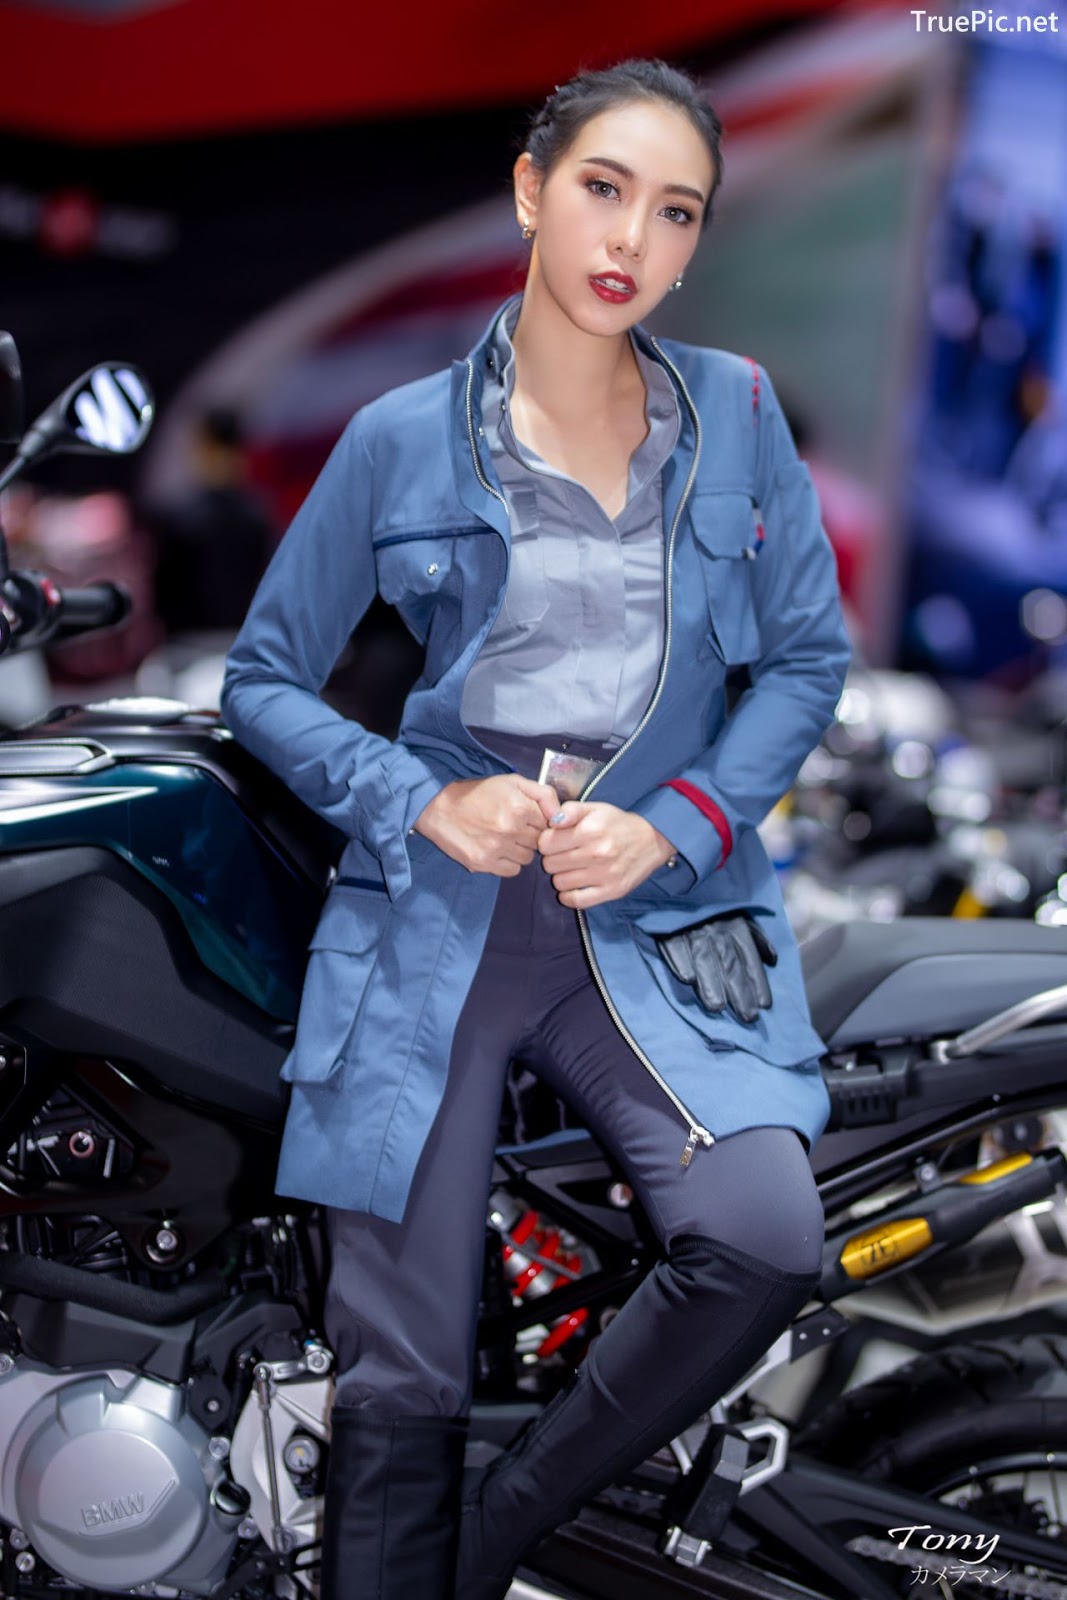 Image-Thailand-Hot-Model-Thai-Racing-Girl-At-Motor-Show-2019-TruePic.net- Picture-36